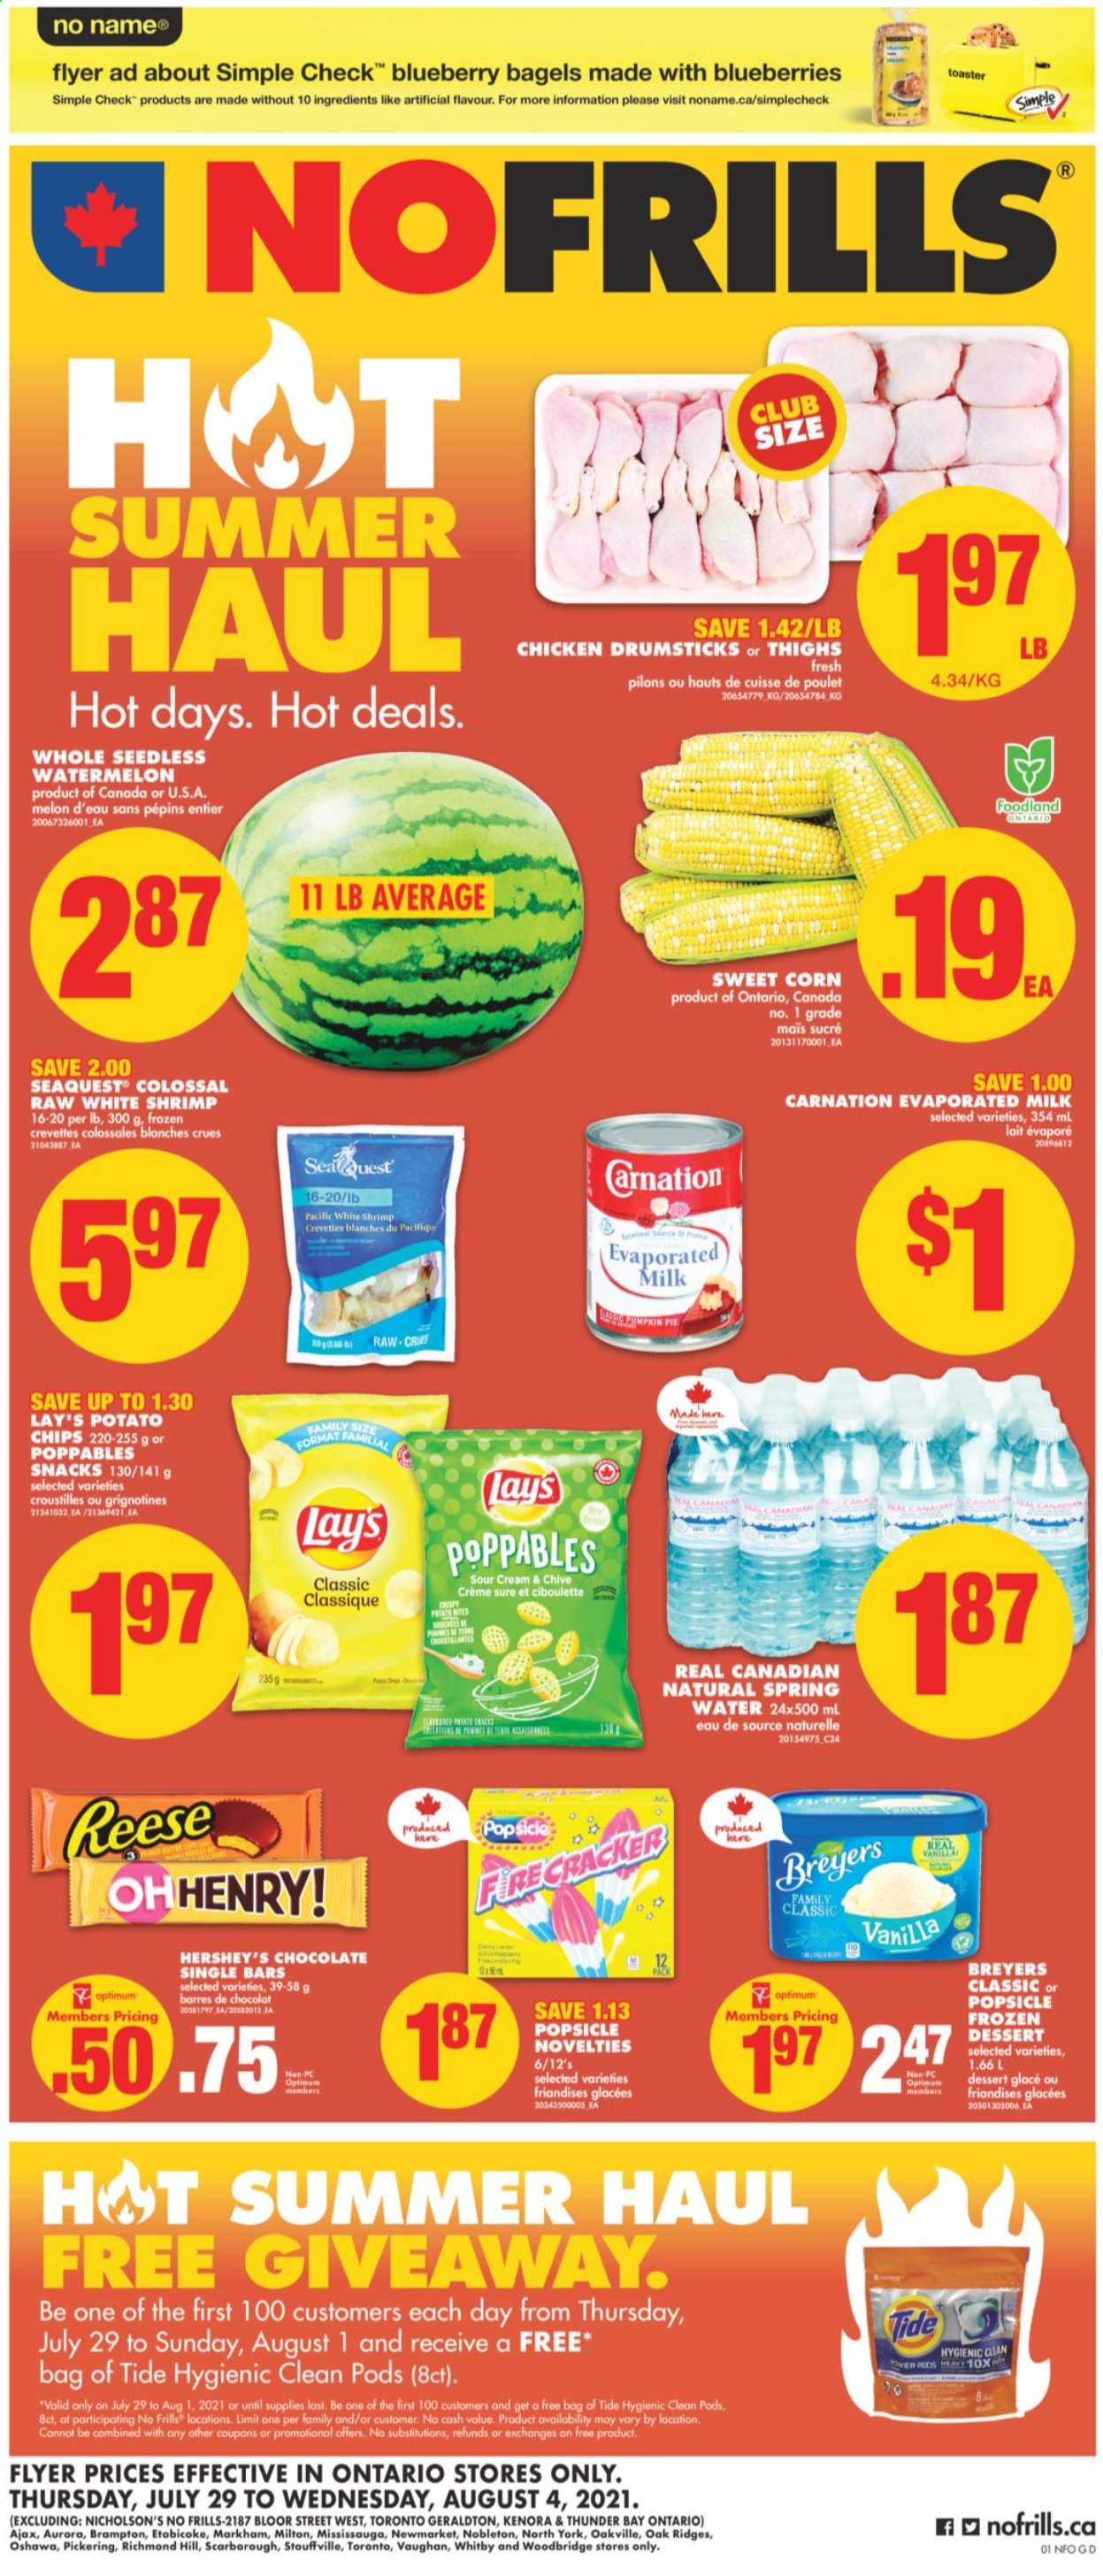 thumbnail - No Frills Flyer - July 29, 2021 - August 04, 2021 - Sales products - bagels, corn, watermelon, melons, shrimps, No Name, evaporated milk, Hershey's, chocolate, snack, crackers, potato chips, Lay’s, spring water, Woodbridge, chicken drumsticks, chicken, Ajax, Tide, Sure, Optimum, toaster. Page 1.